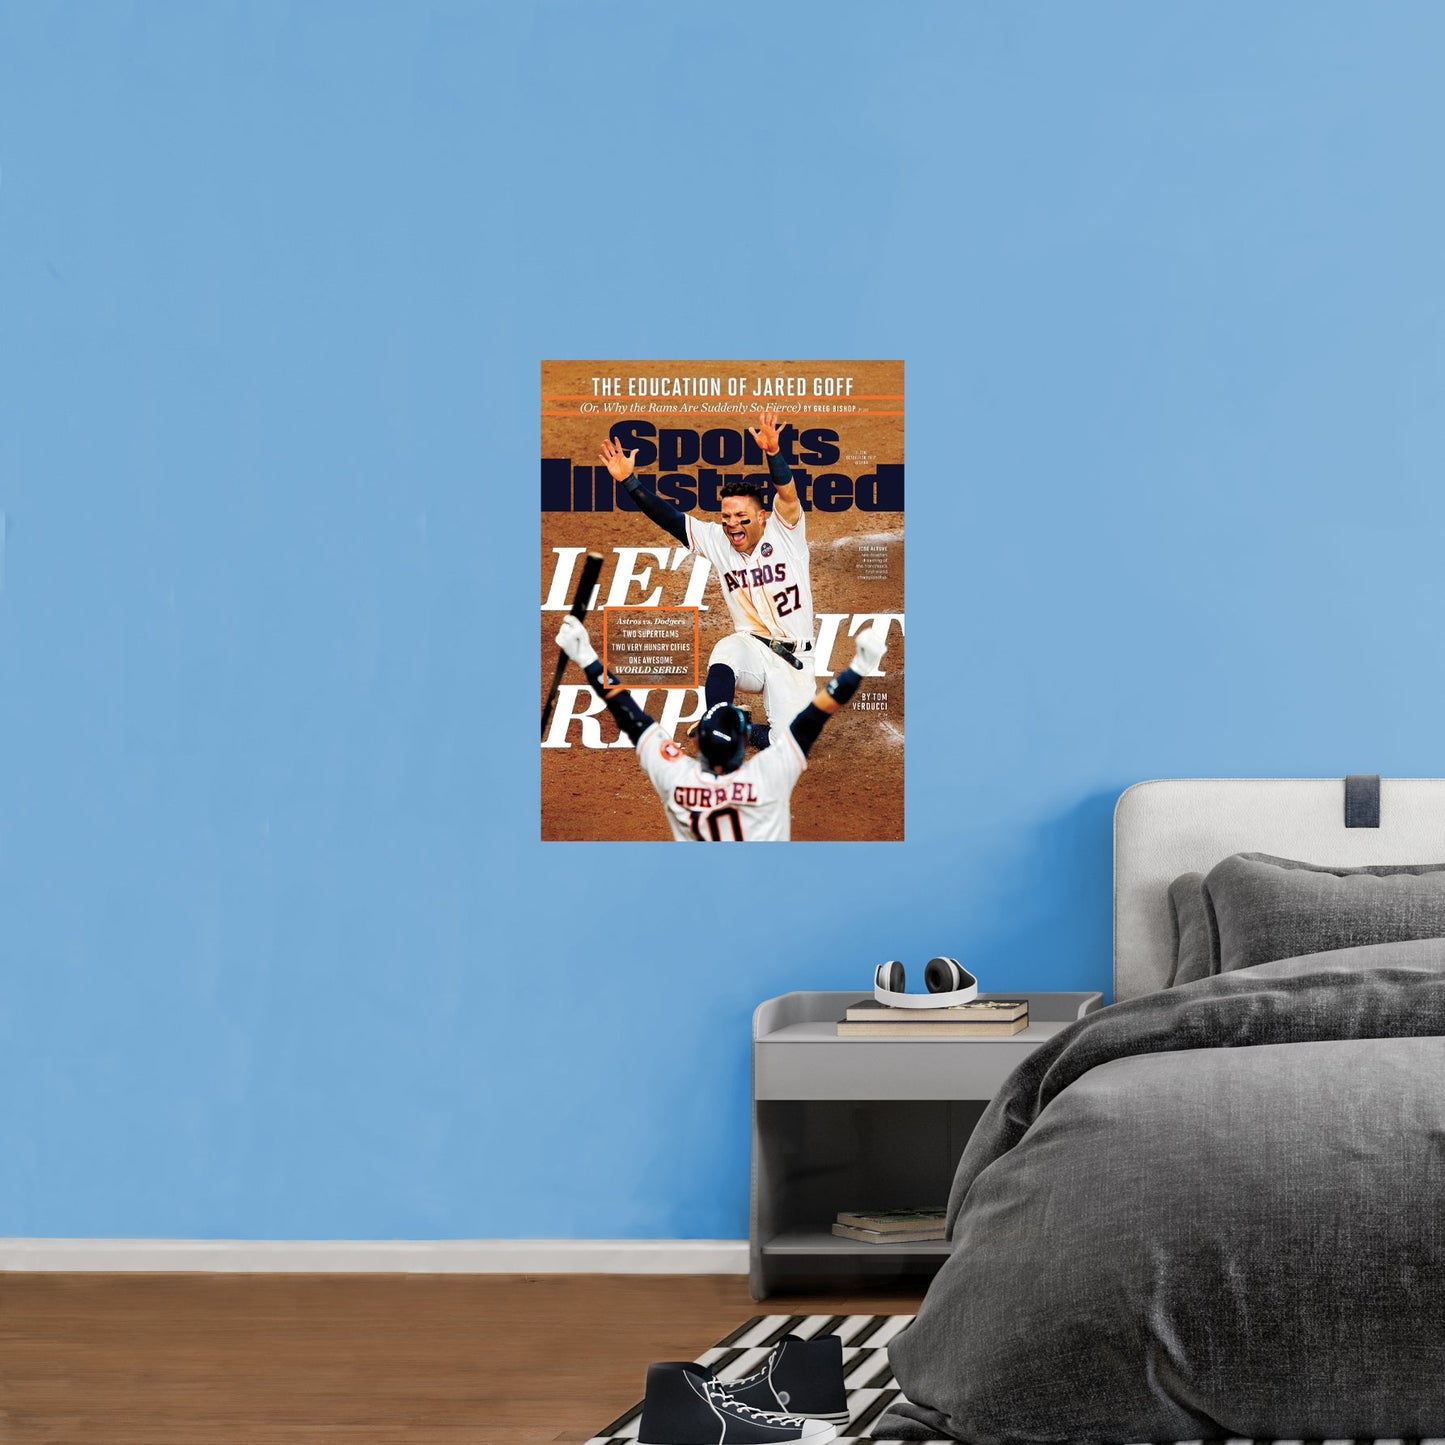 Houston Astros: José Altuve and Yuli Gurriel October 2017 Sports Illustrated Cover - Officially Licensed MLB Removable Adhesive Decal